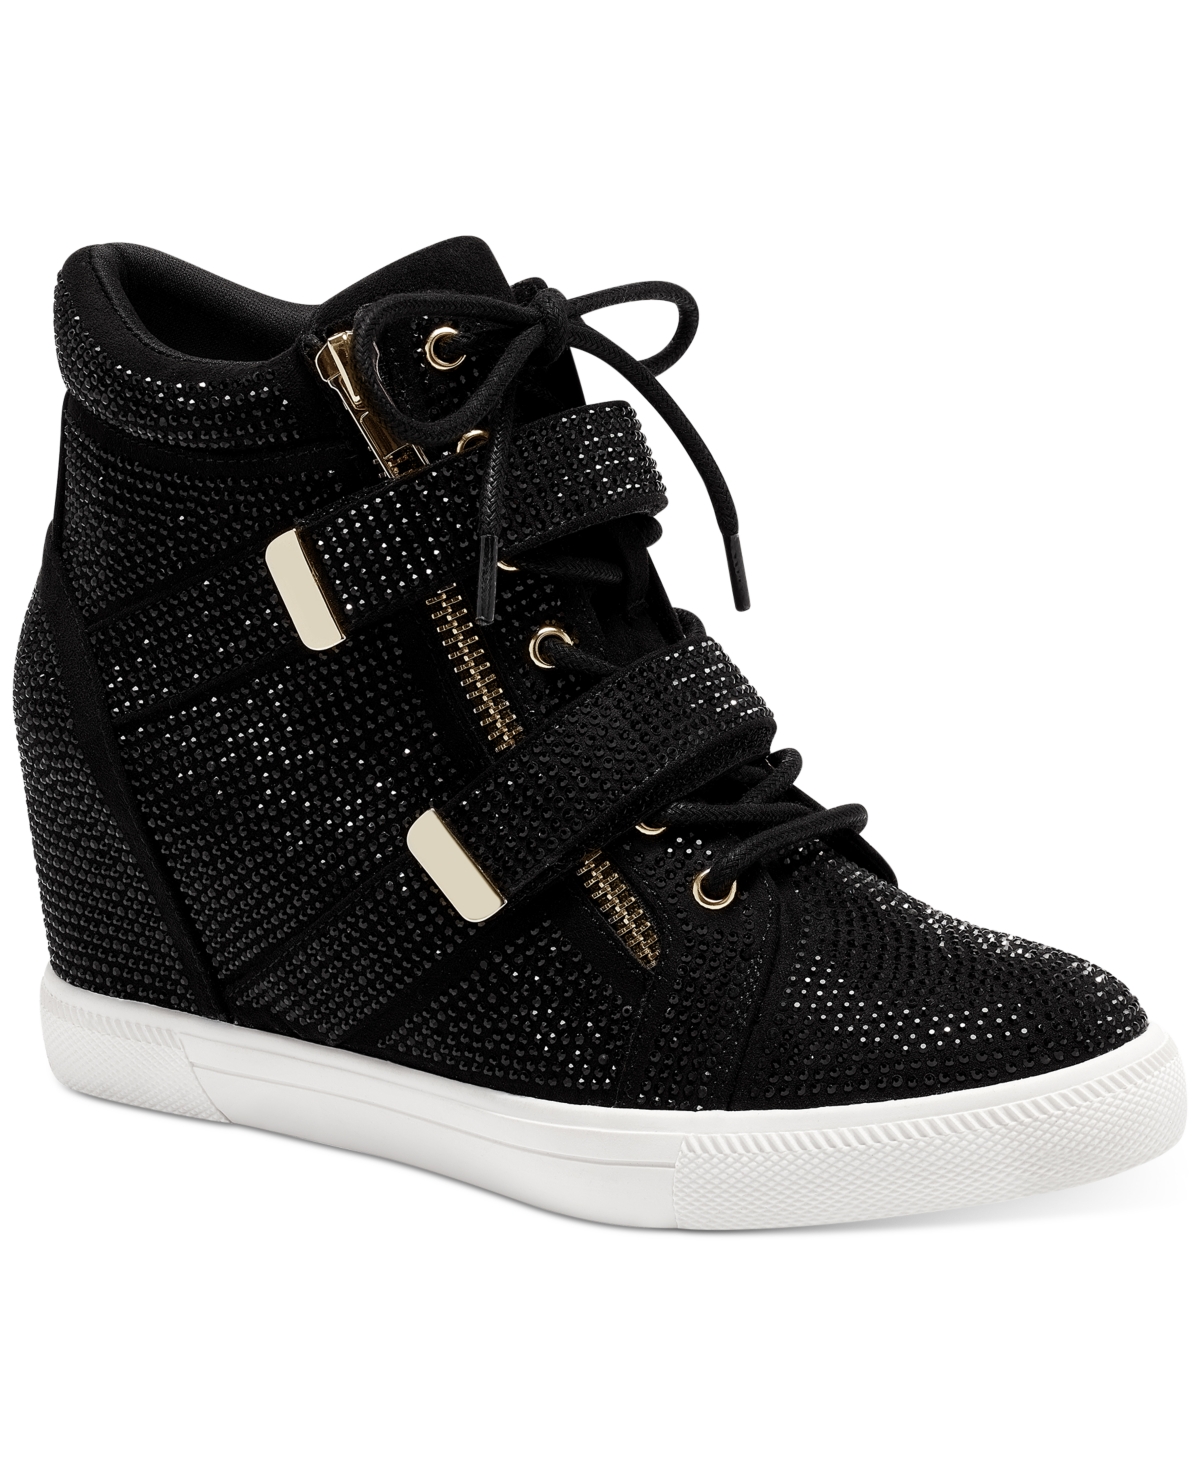 INC INTERNATIONAL CONCEPTS WOMEN'S DEBBY WEDGE SNEAKERS, CREATED FOR MACY'S WOMEN'S SHOES